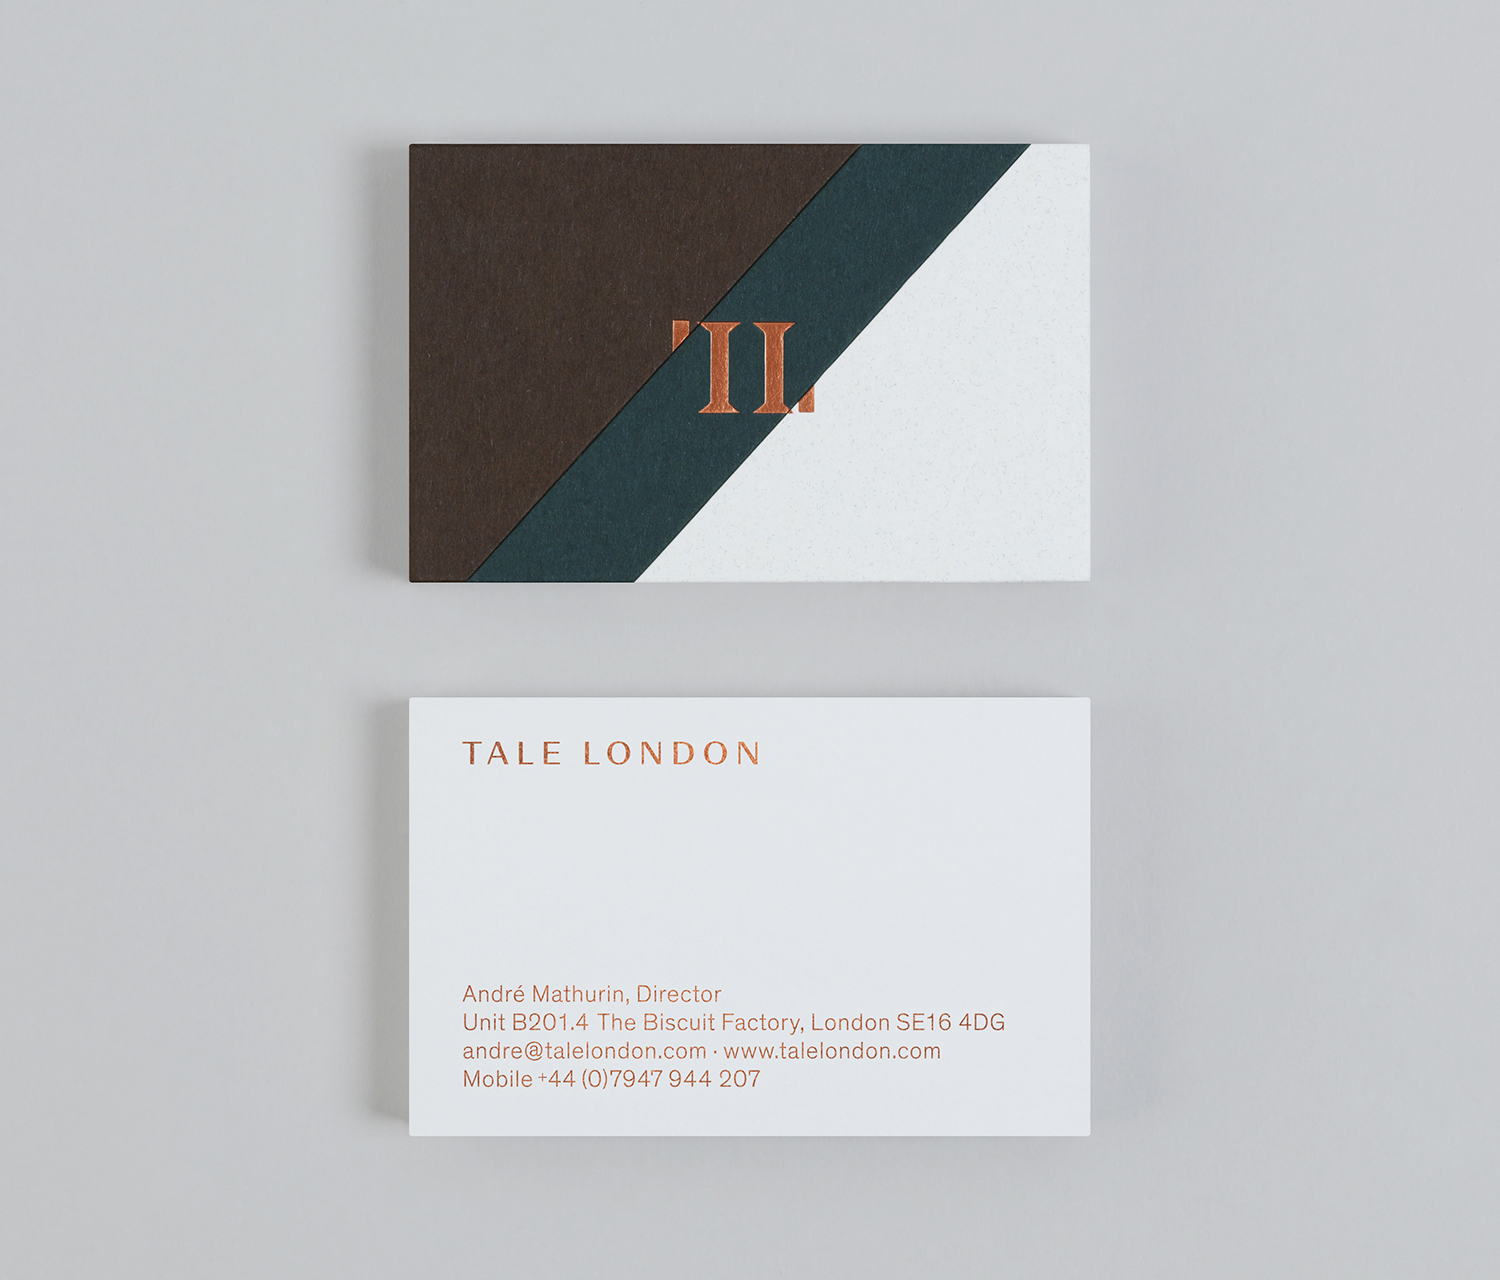 Copper foil embossed paper marquetry business cards by Two Times Elliott for architecture and interior design visualisation studio Tale London